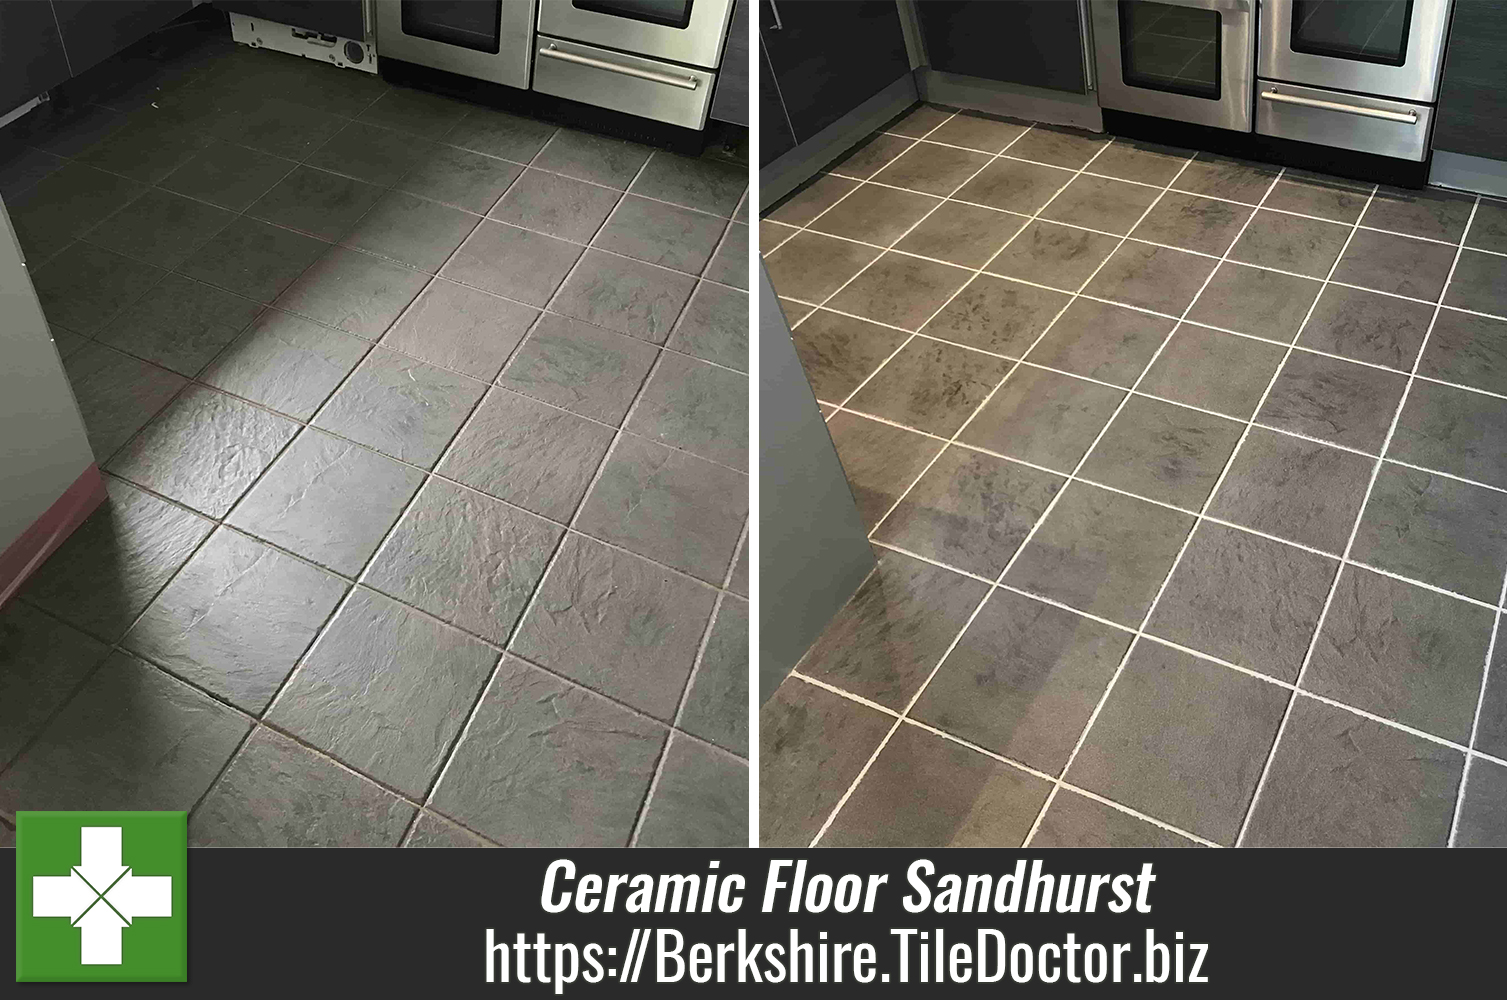 Removing Grout Haze from Ceramic Tile and Grout in a Sandhurst Kitchen